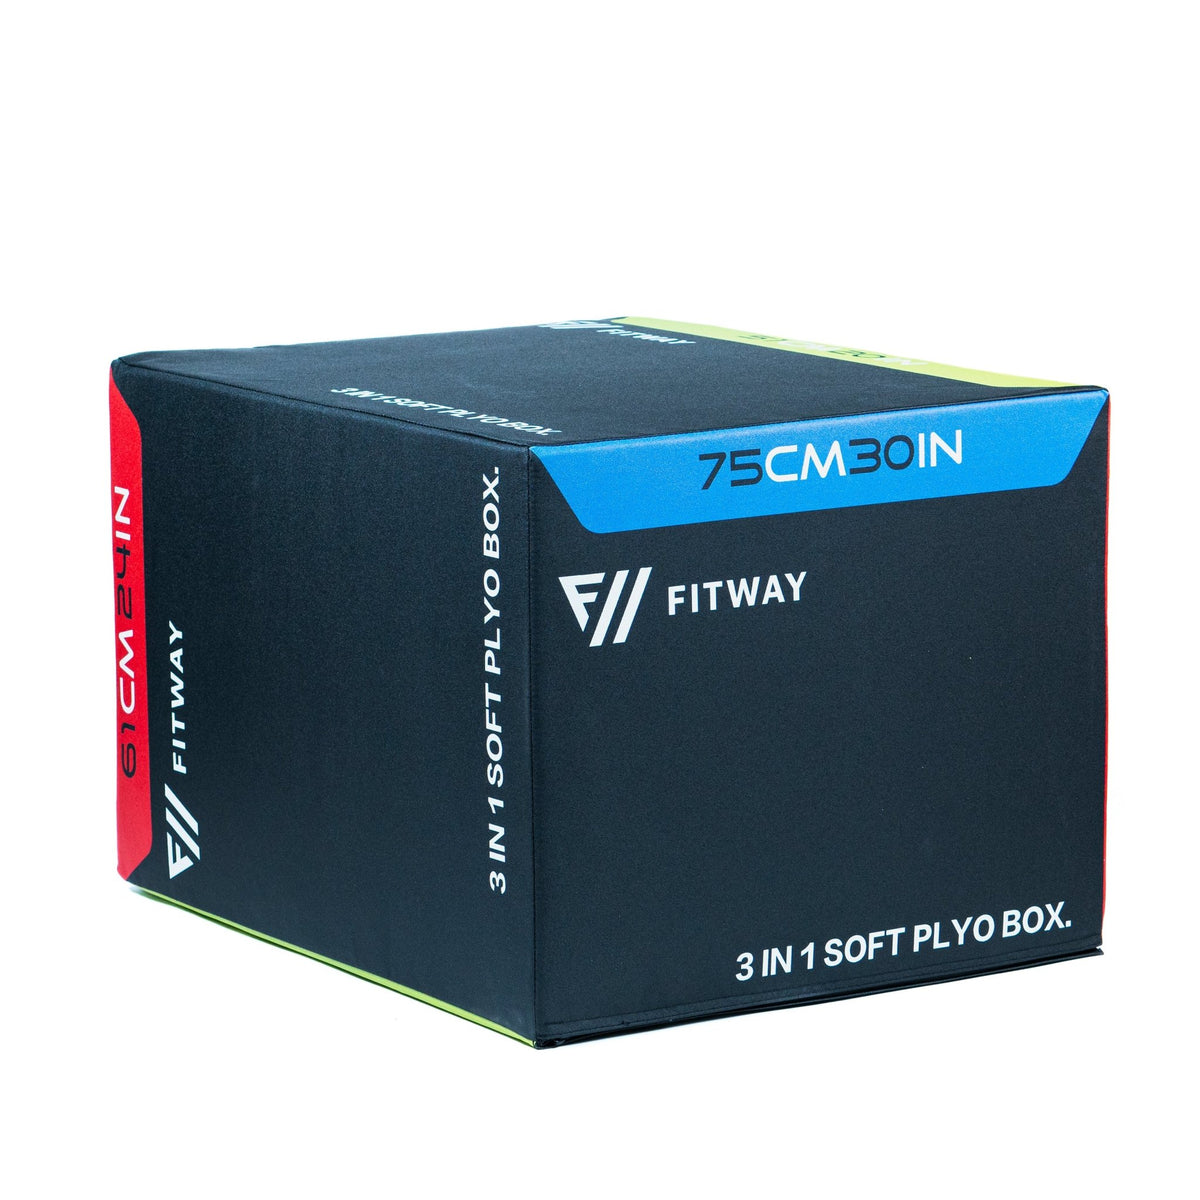 FitWay Equip. 3-in-1 Soft Plyo Box - Fitness Experience